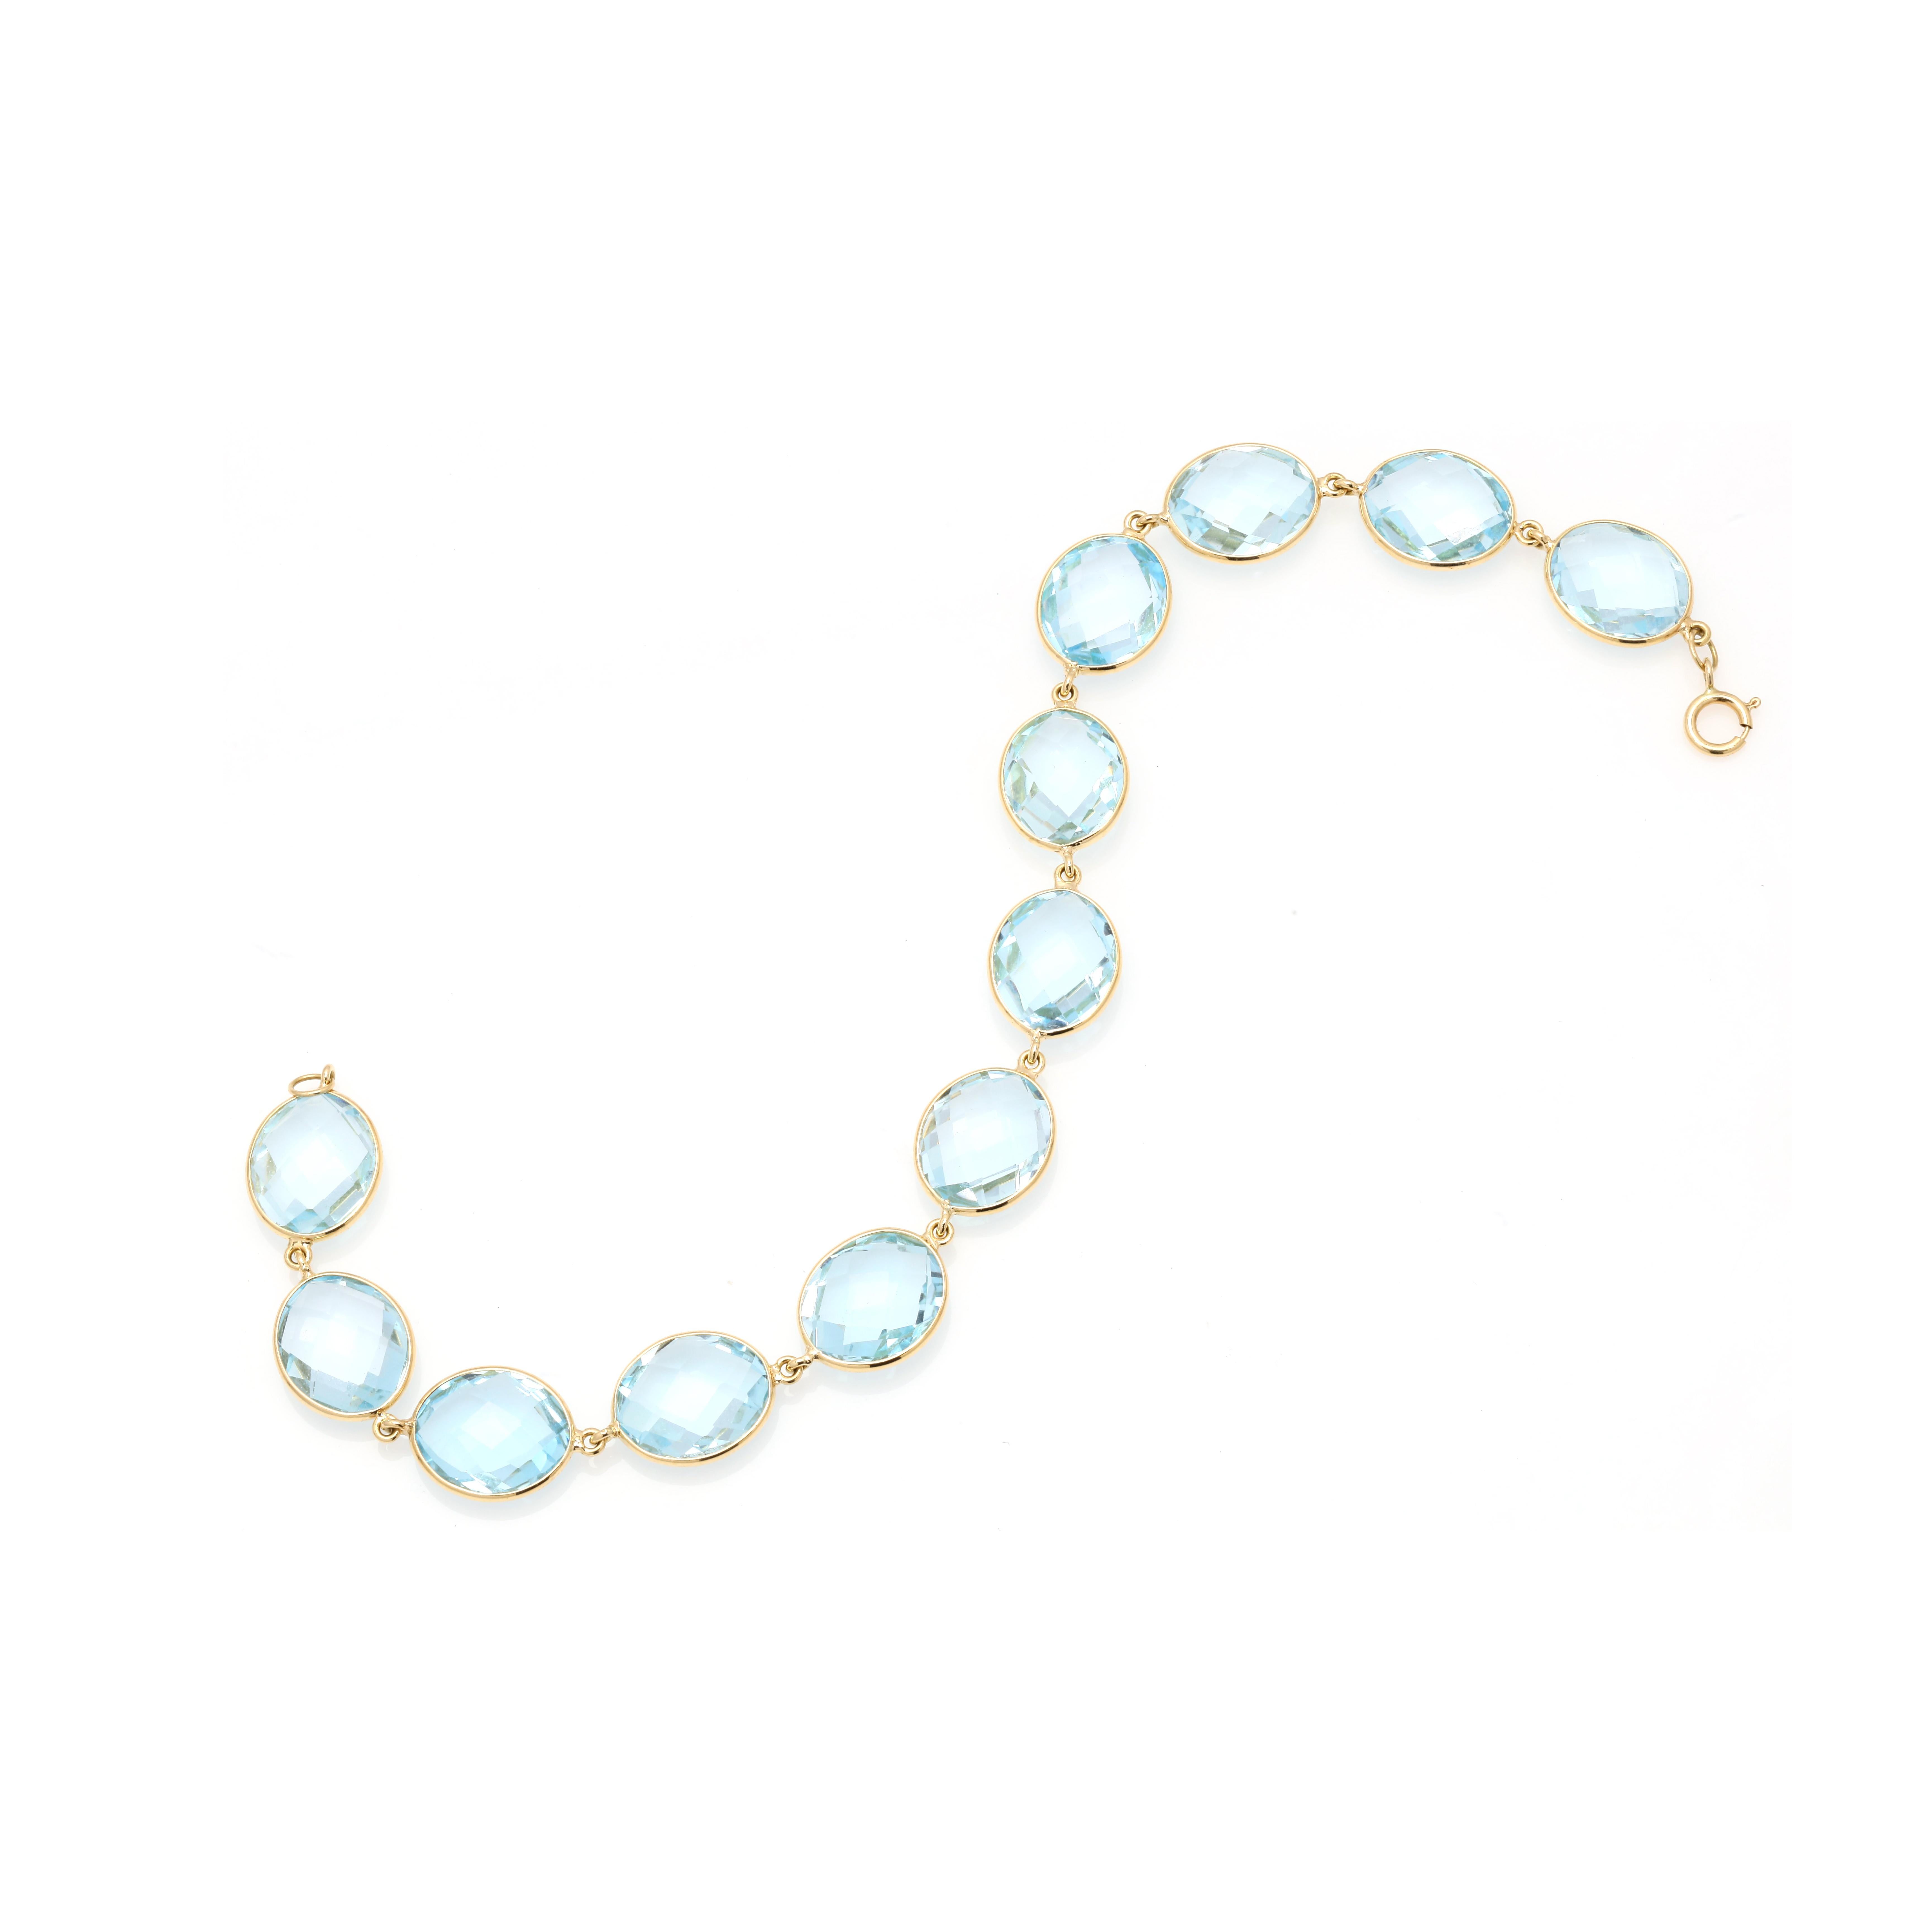 Women's Translucent 41.7 ct Oval Blue Topaz Chain Bracelet in Solid 18K Yellow Gold For Sale